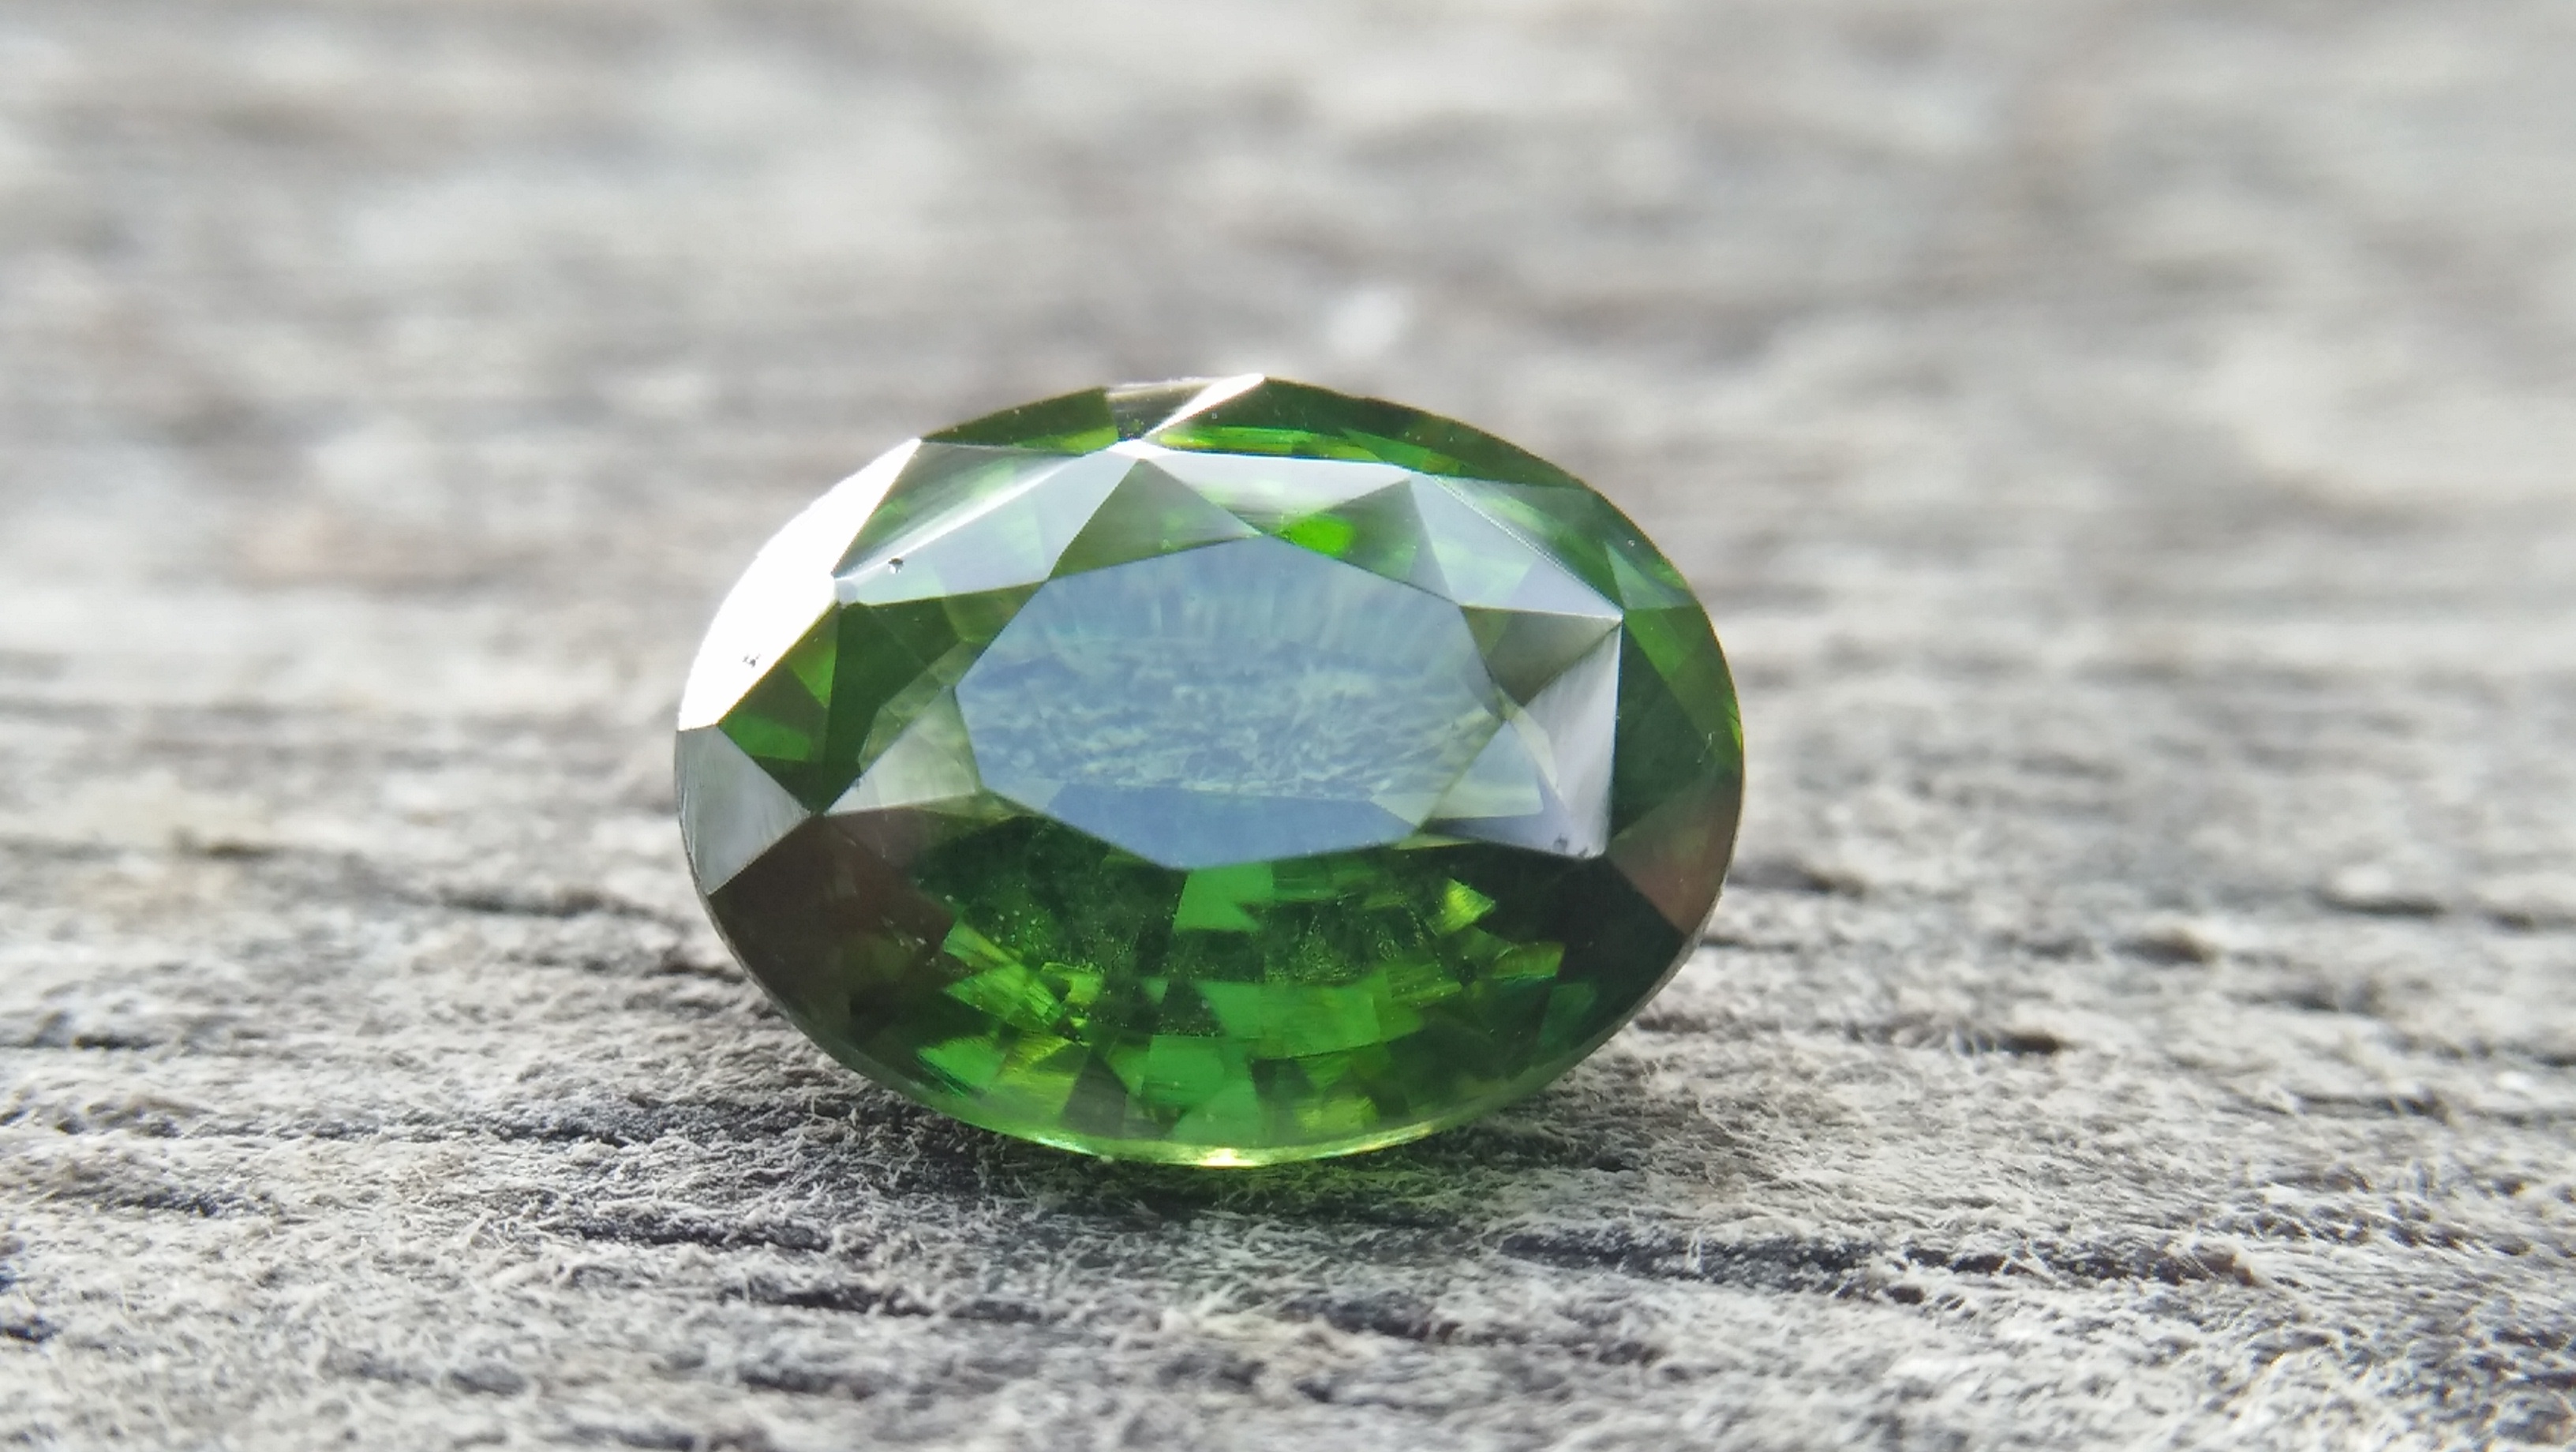 Zircon is a mineral belonging to the group of nesosilicates. Its chemical name is zirconium silicate, and its corresponding chemical formula is ZrSiO₄. Green colour Zircons are rare colour veriety of zircon family. Zircon has an anti-spasmodic effect on the liver and gall bladder of the wearer. Green Zircon helps one open up to make new friends and draws wealth